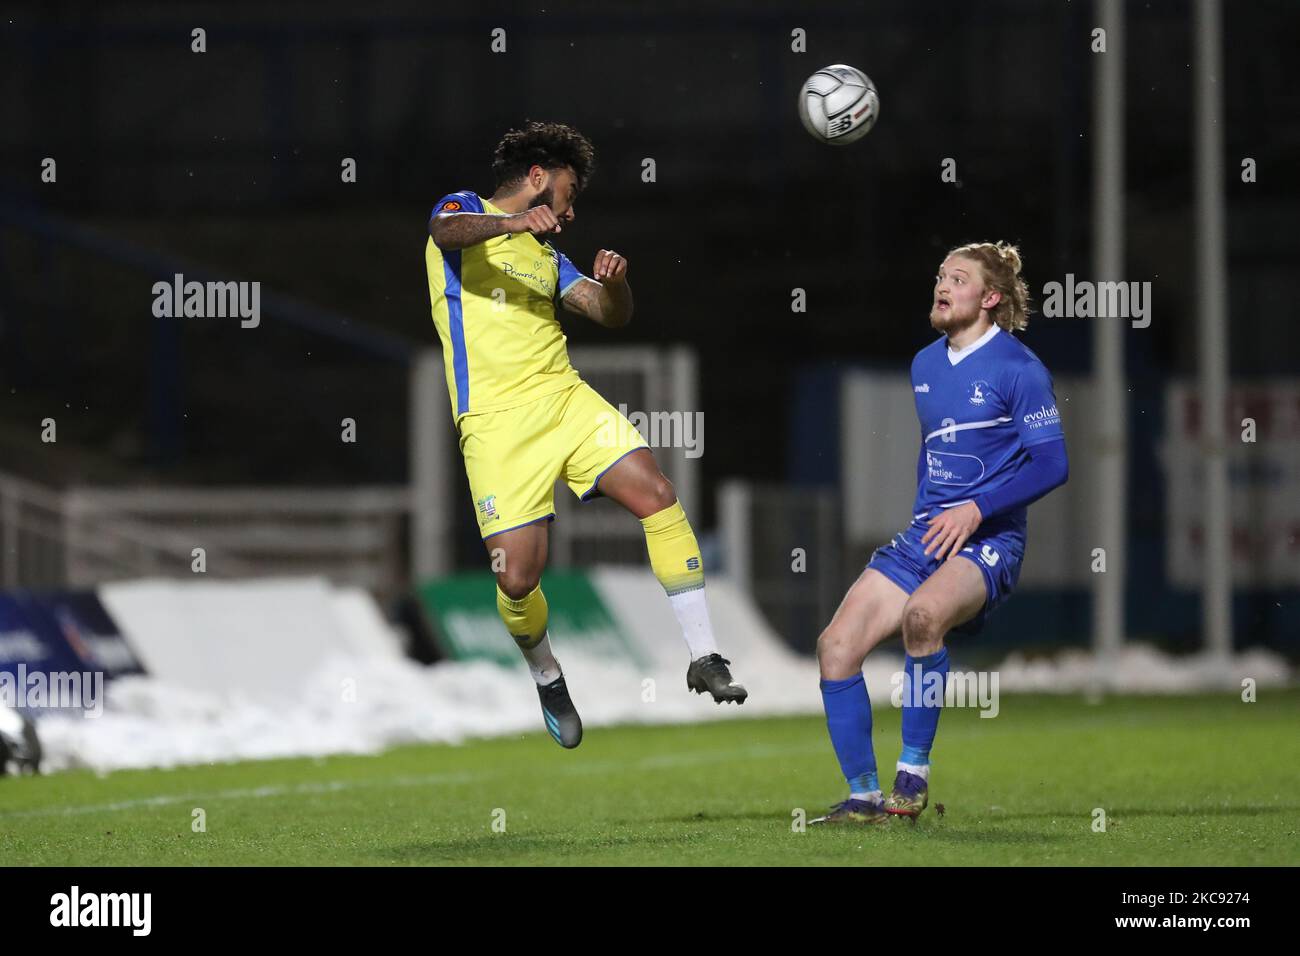 Jordan Cranston of Solihull Moors contests a header with Hartlepool United's Luke Armstrong during the Vanarama National League match between Hartlepool United and Solihull Moors at Victoria Park, Hartlepool on Tuesday 9th February 2021. (Photo by Mark Fletcher/MI News/NurPhoto) Stock Photo